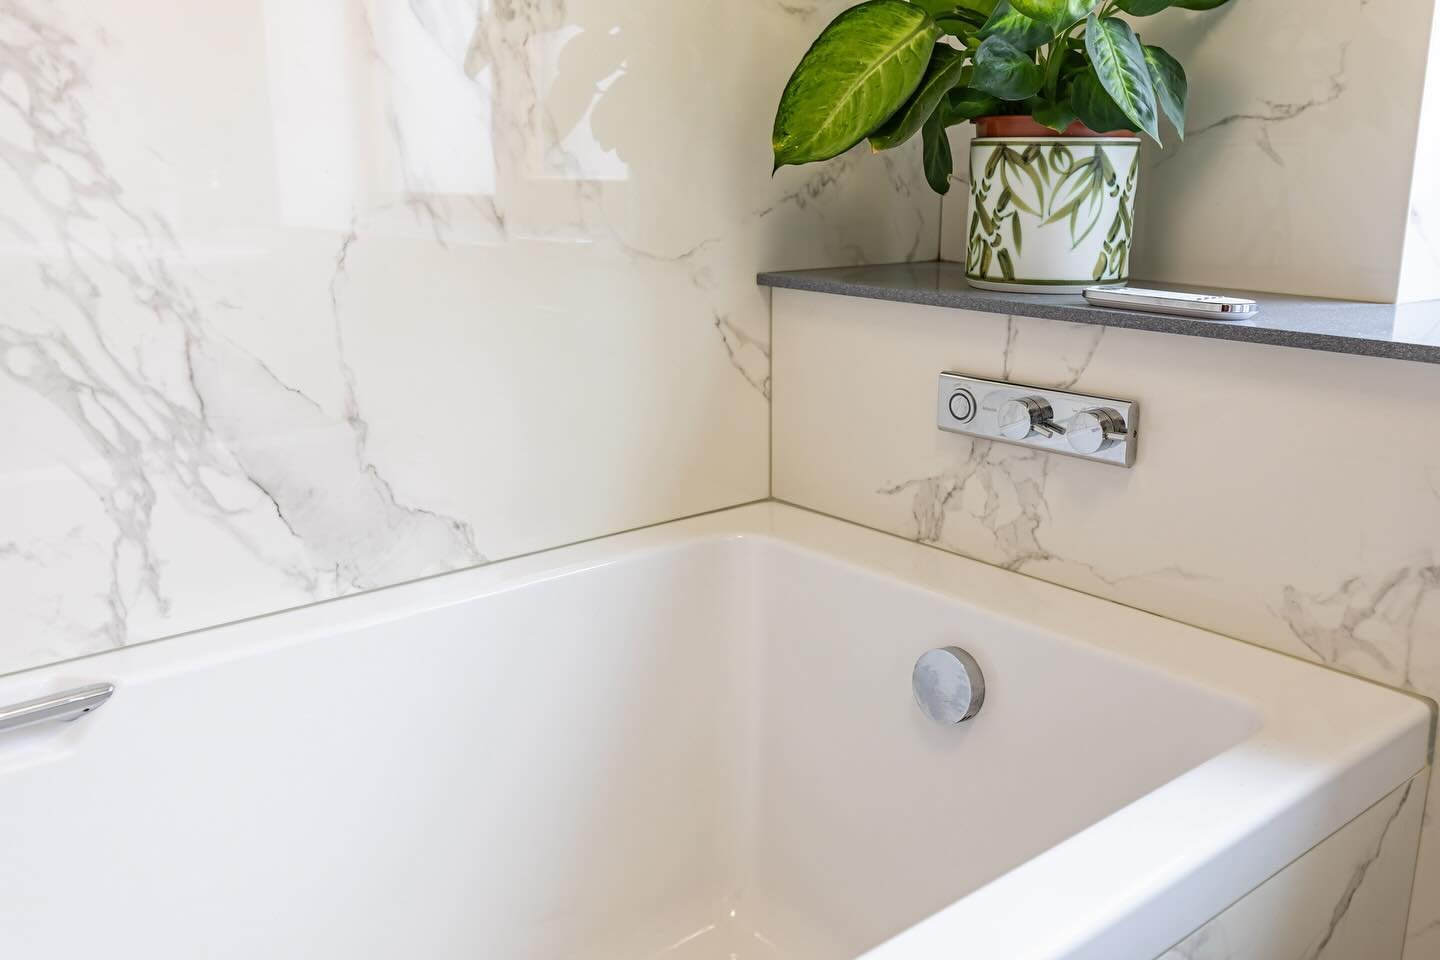 This simplistic and elegant bathroom is packed full of features that are not always obvious to the eye, here are just a few:
Bespoke fabricated Dekton Mineral wall panels and bath panel - Tapless digital bath filler - Geberit Aquaclean WC with heated